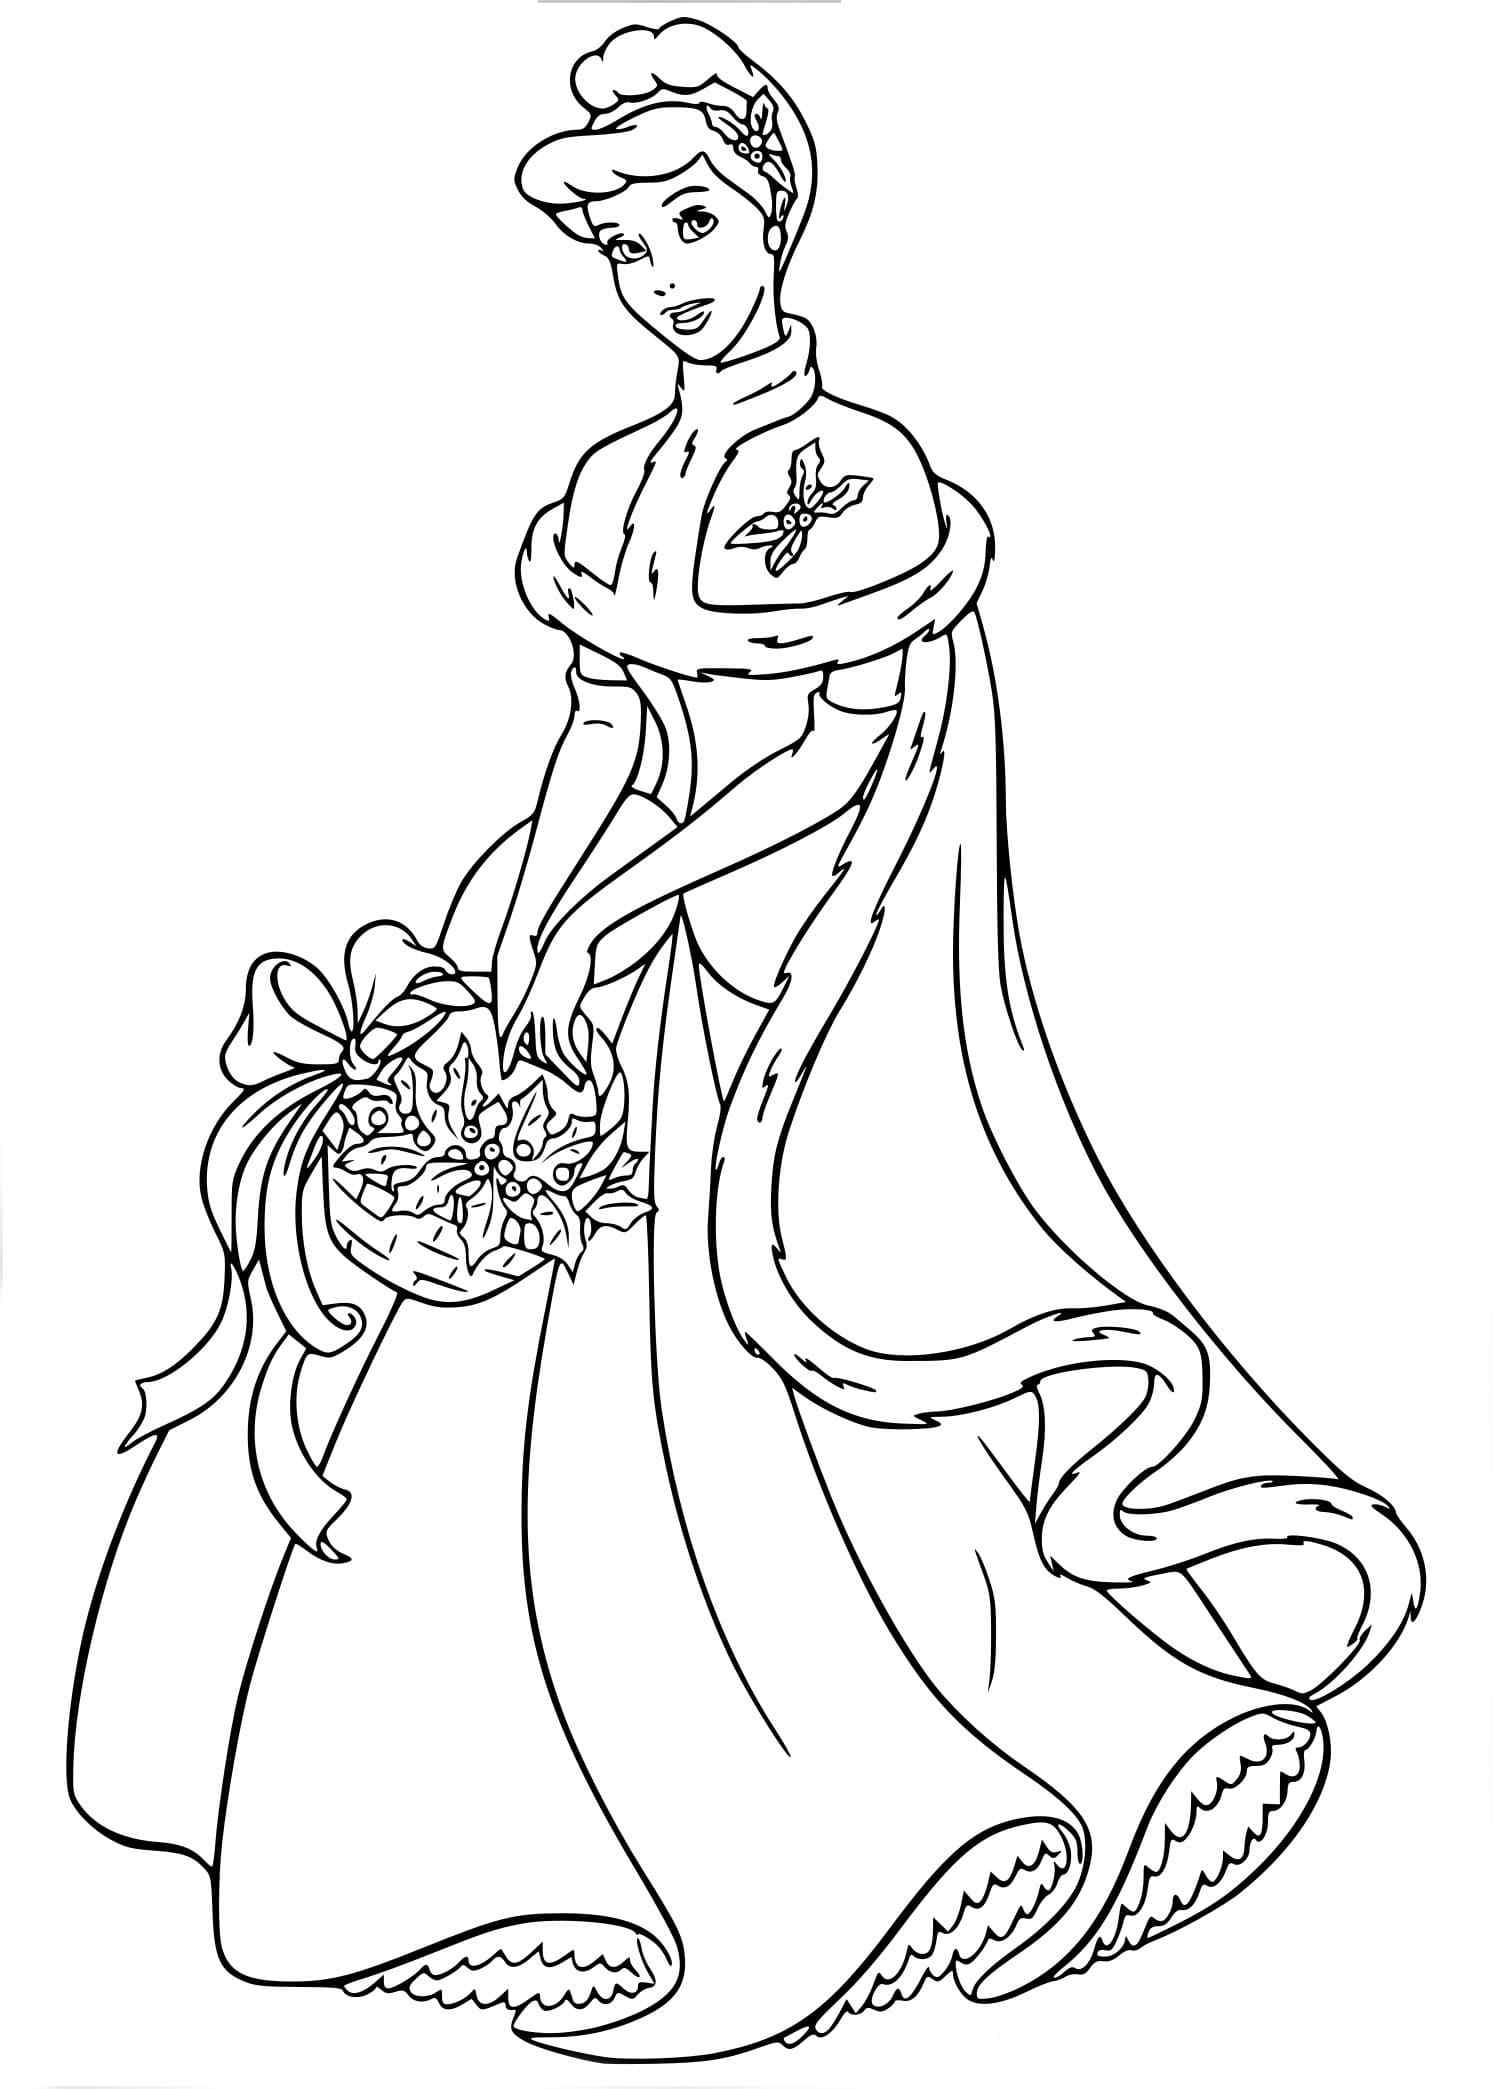 Winter Bouquet From The Princess For Christmas Coloring Page